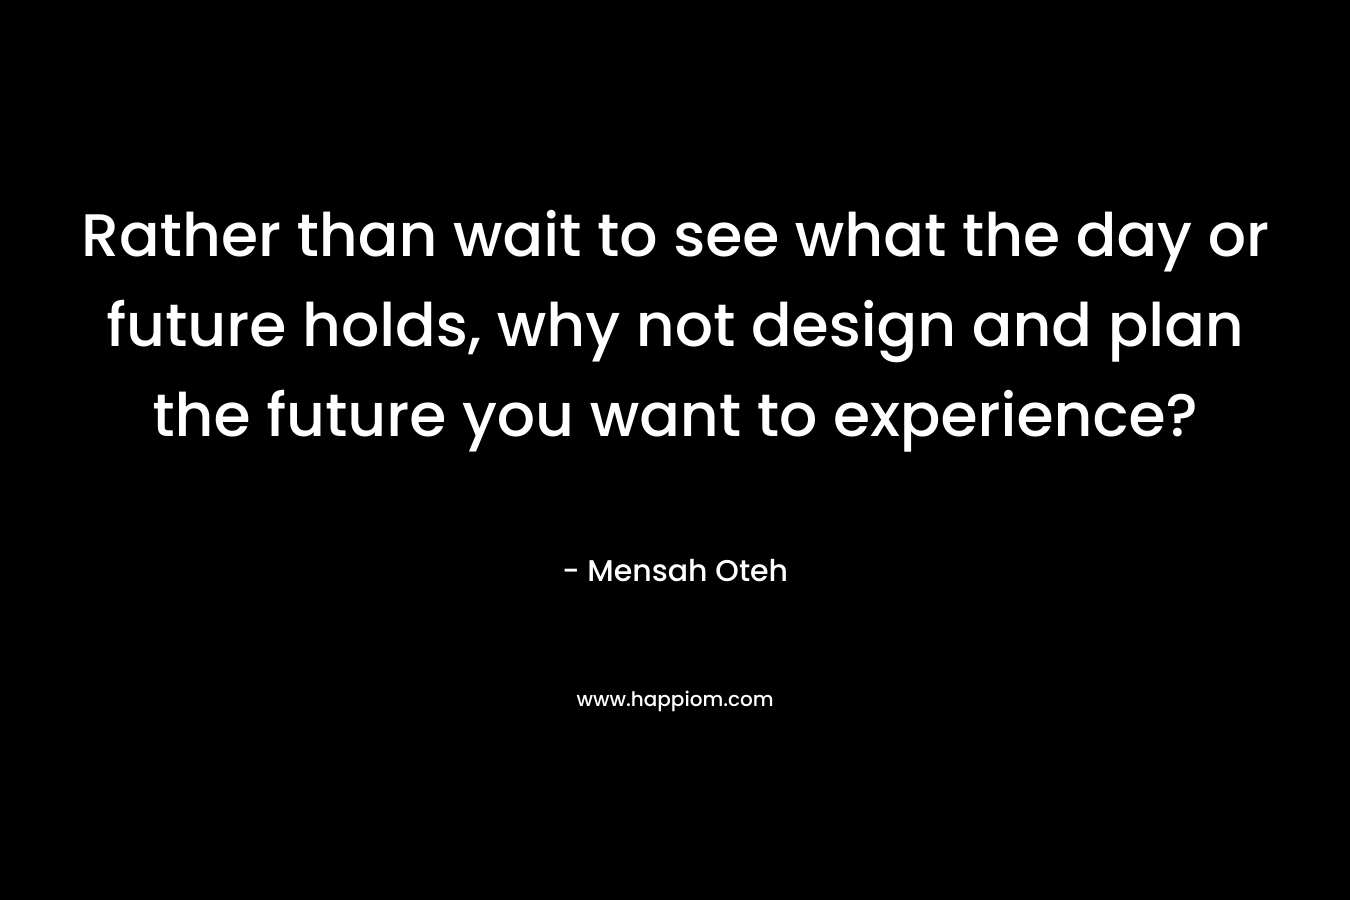 Rather than wait to see what the day or future holds, why not design and plan the future you want to experience?